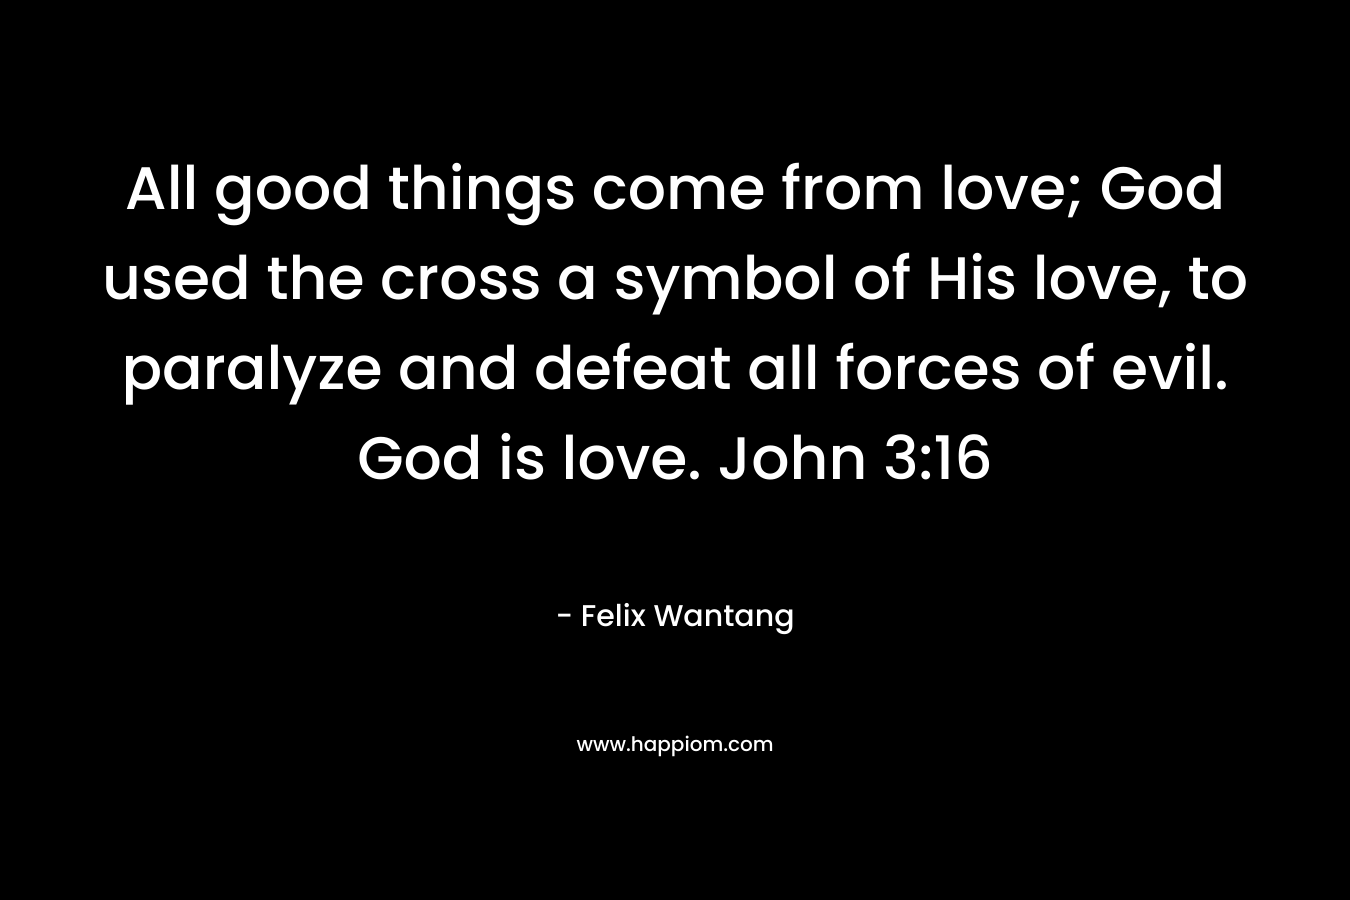 All good things come from love; God used the cross a symbol of His love, to paralyze and defeat all forces of evil. God is love. John 3:16